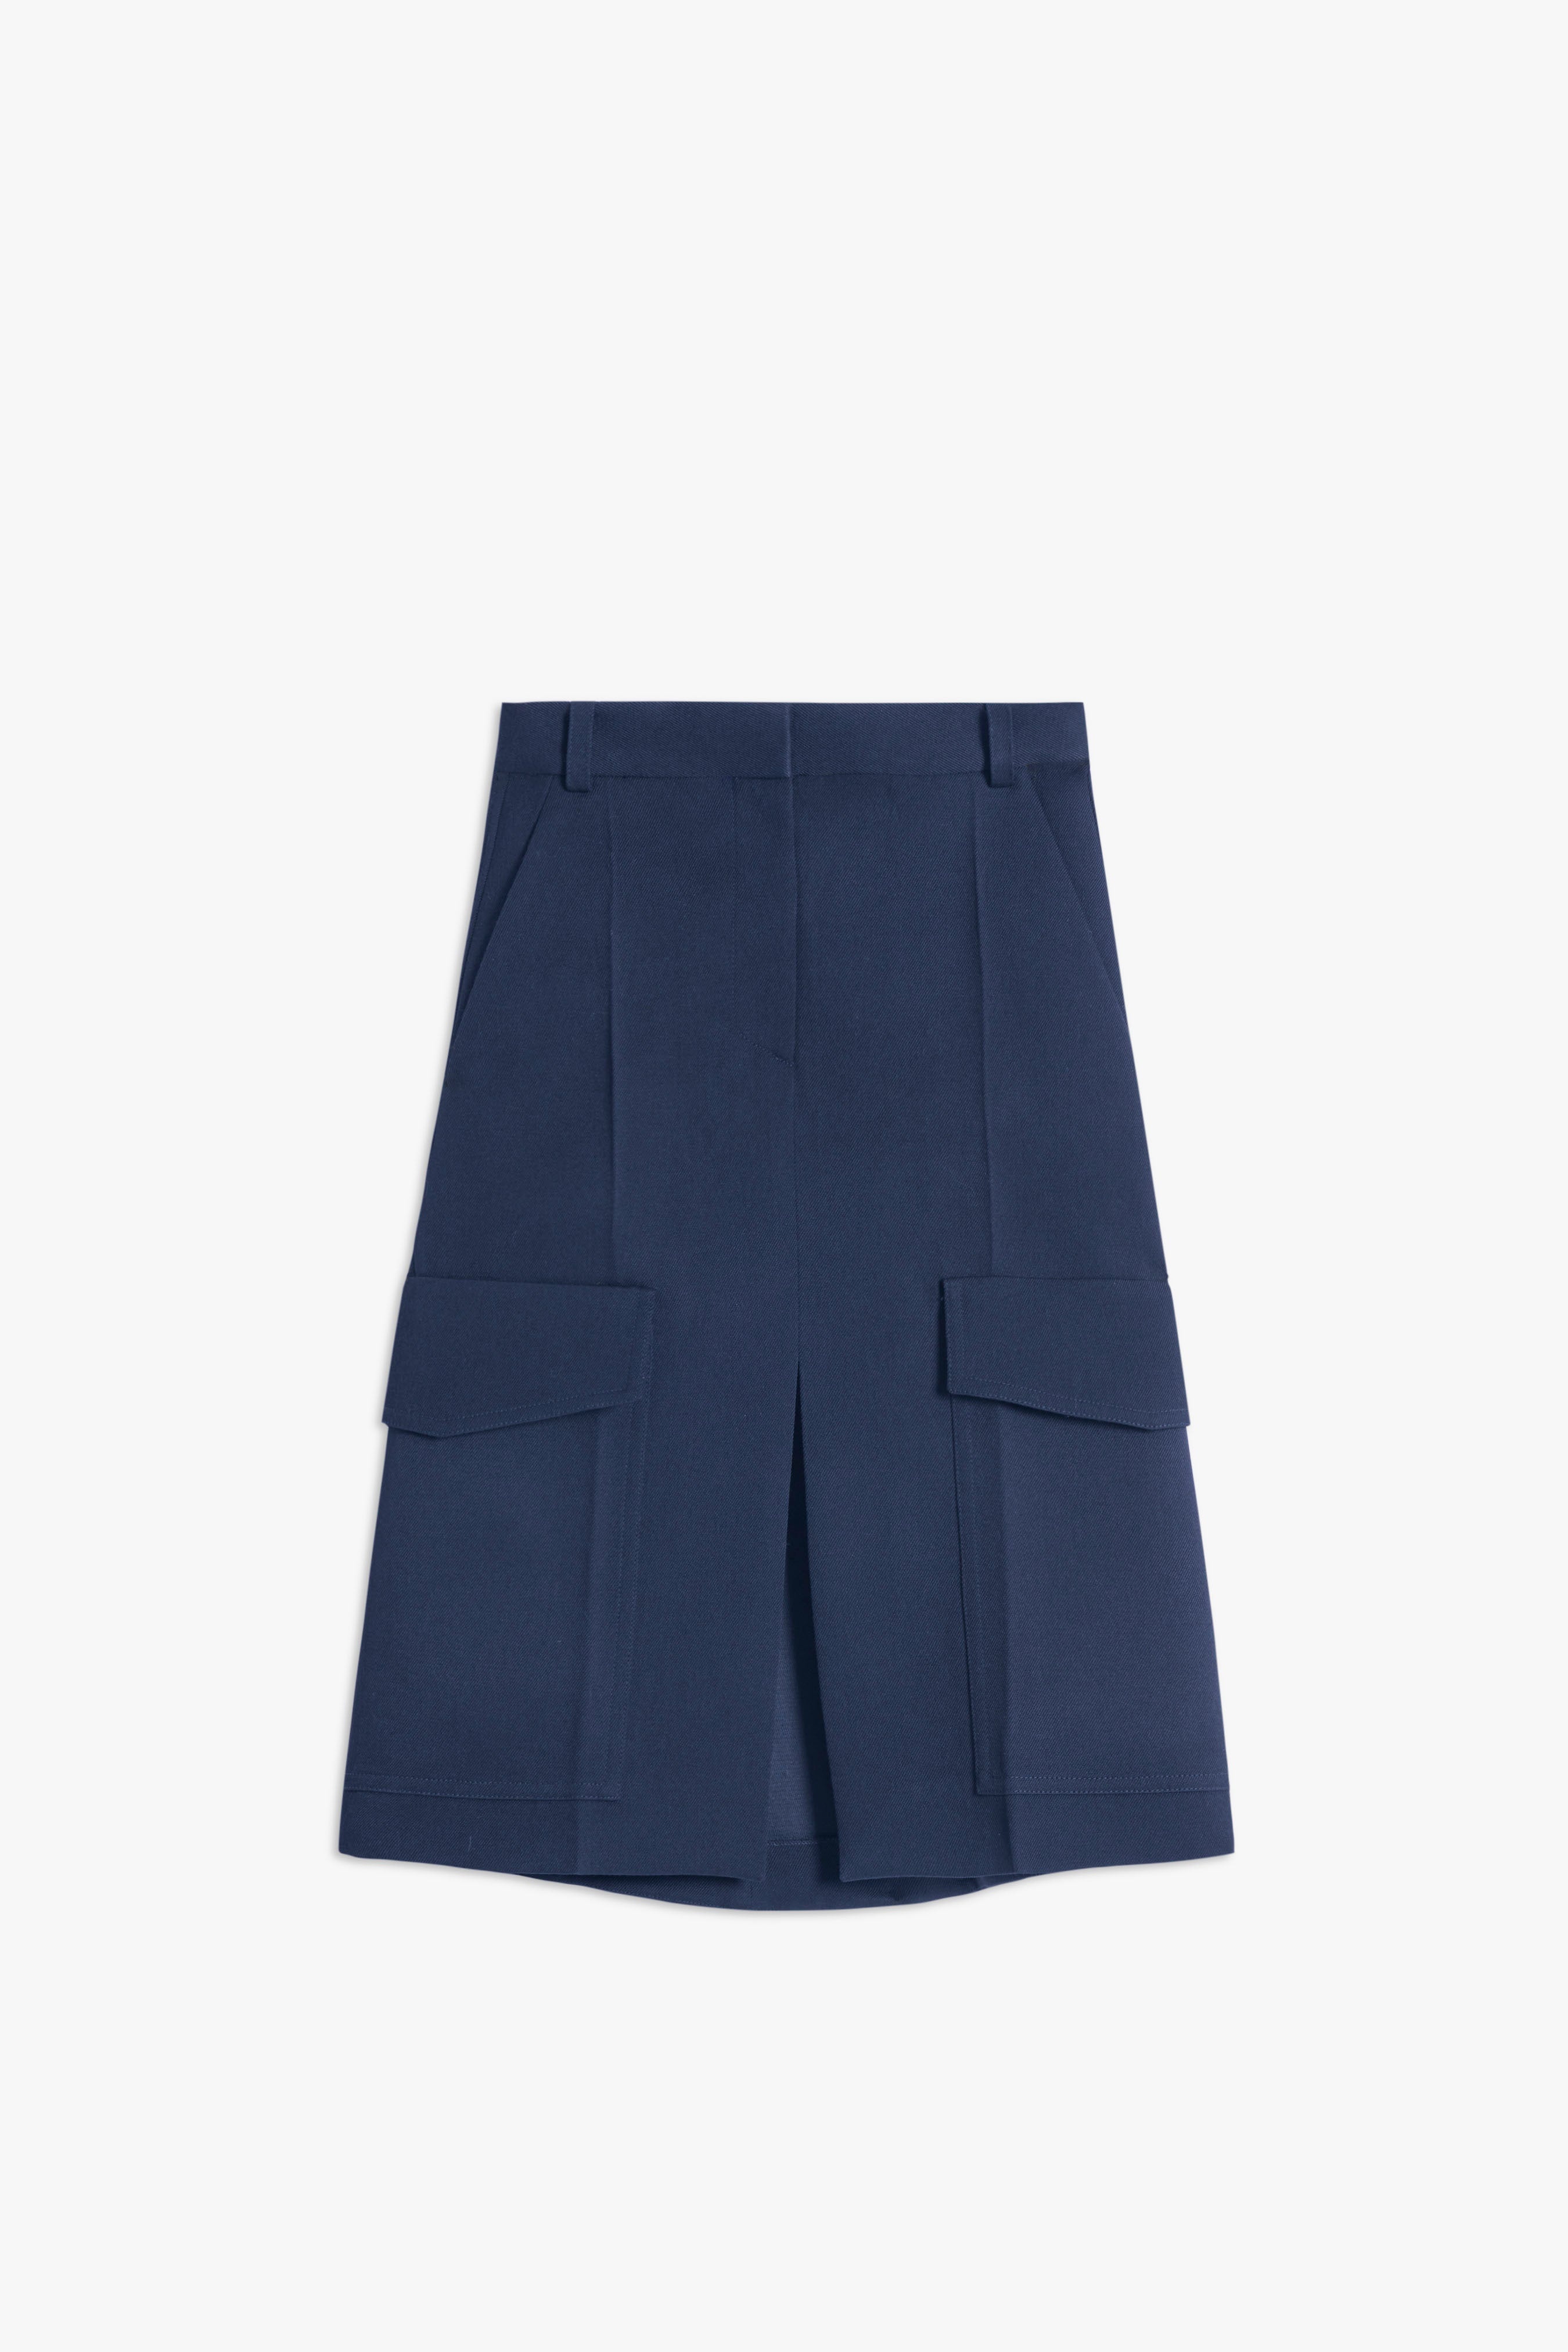 Tailored Utility Skirt in Steel Blue - 1